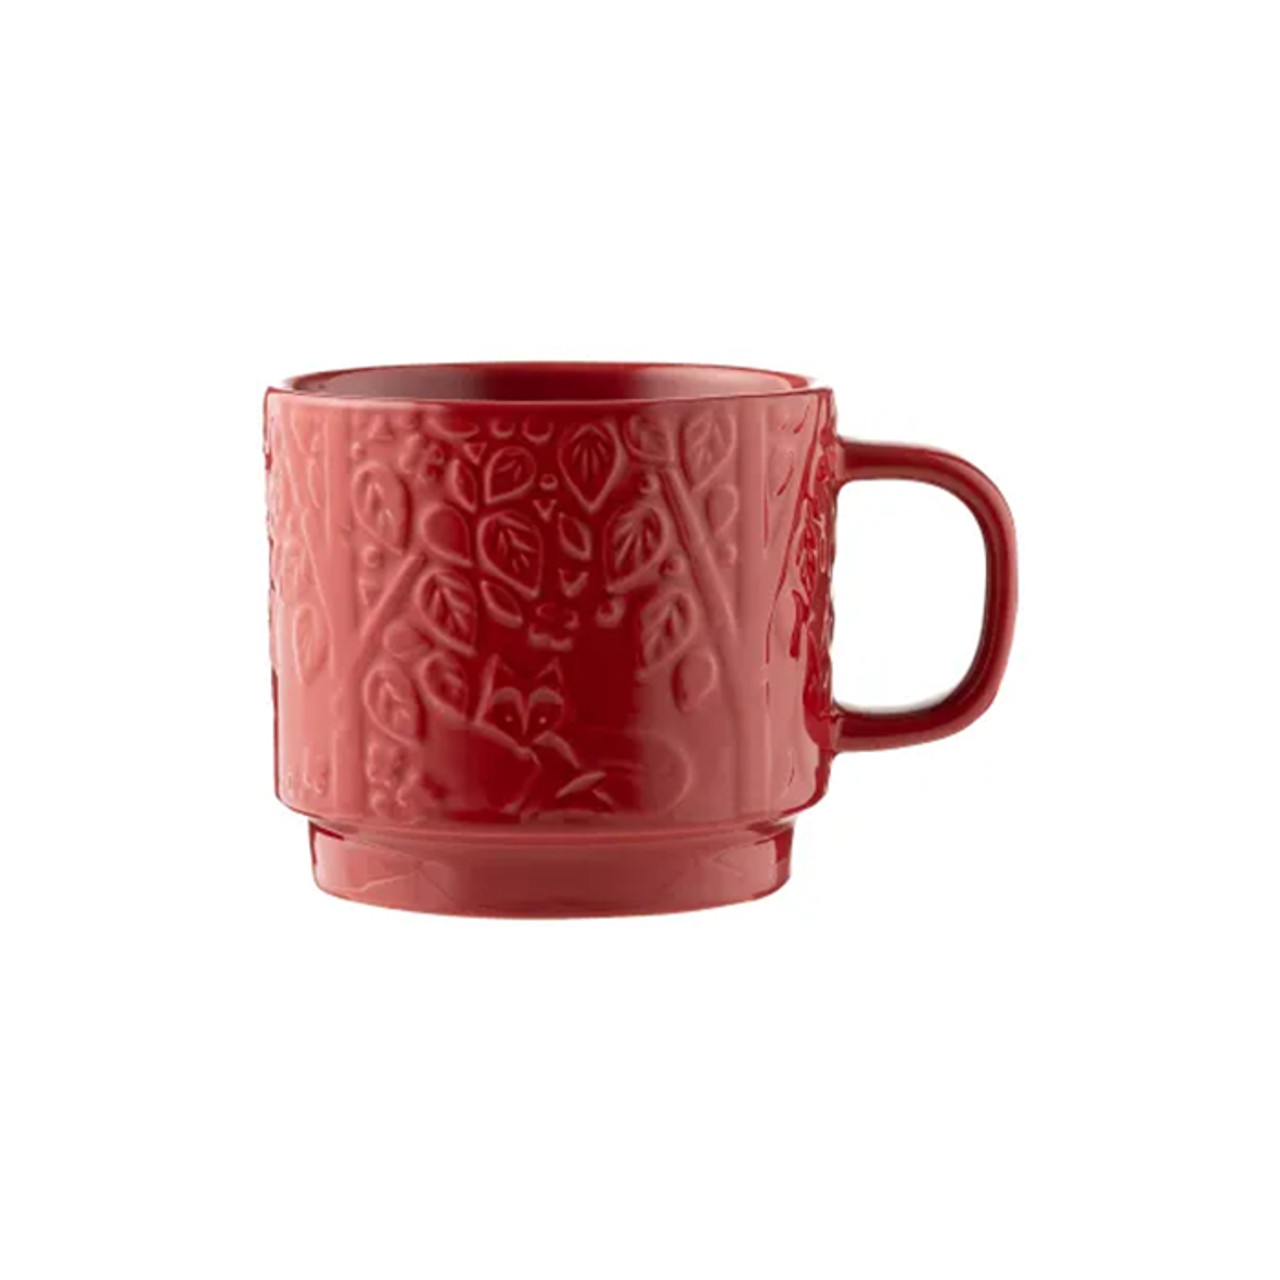 In The Forest Mug Red 300ml